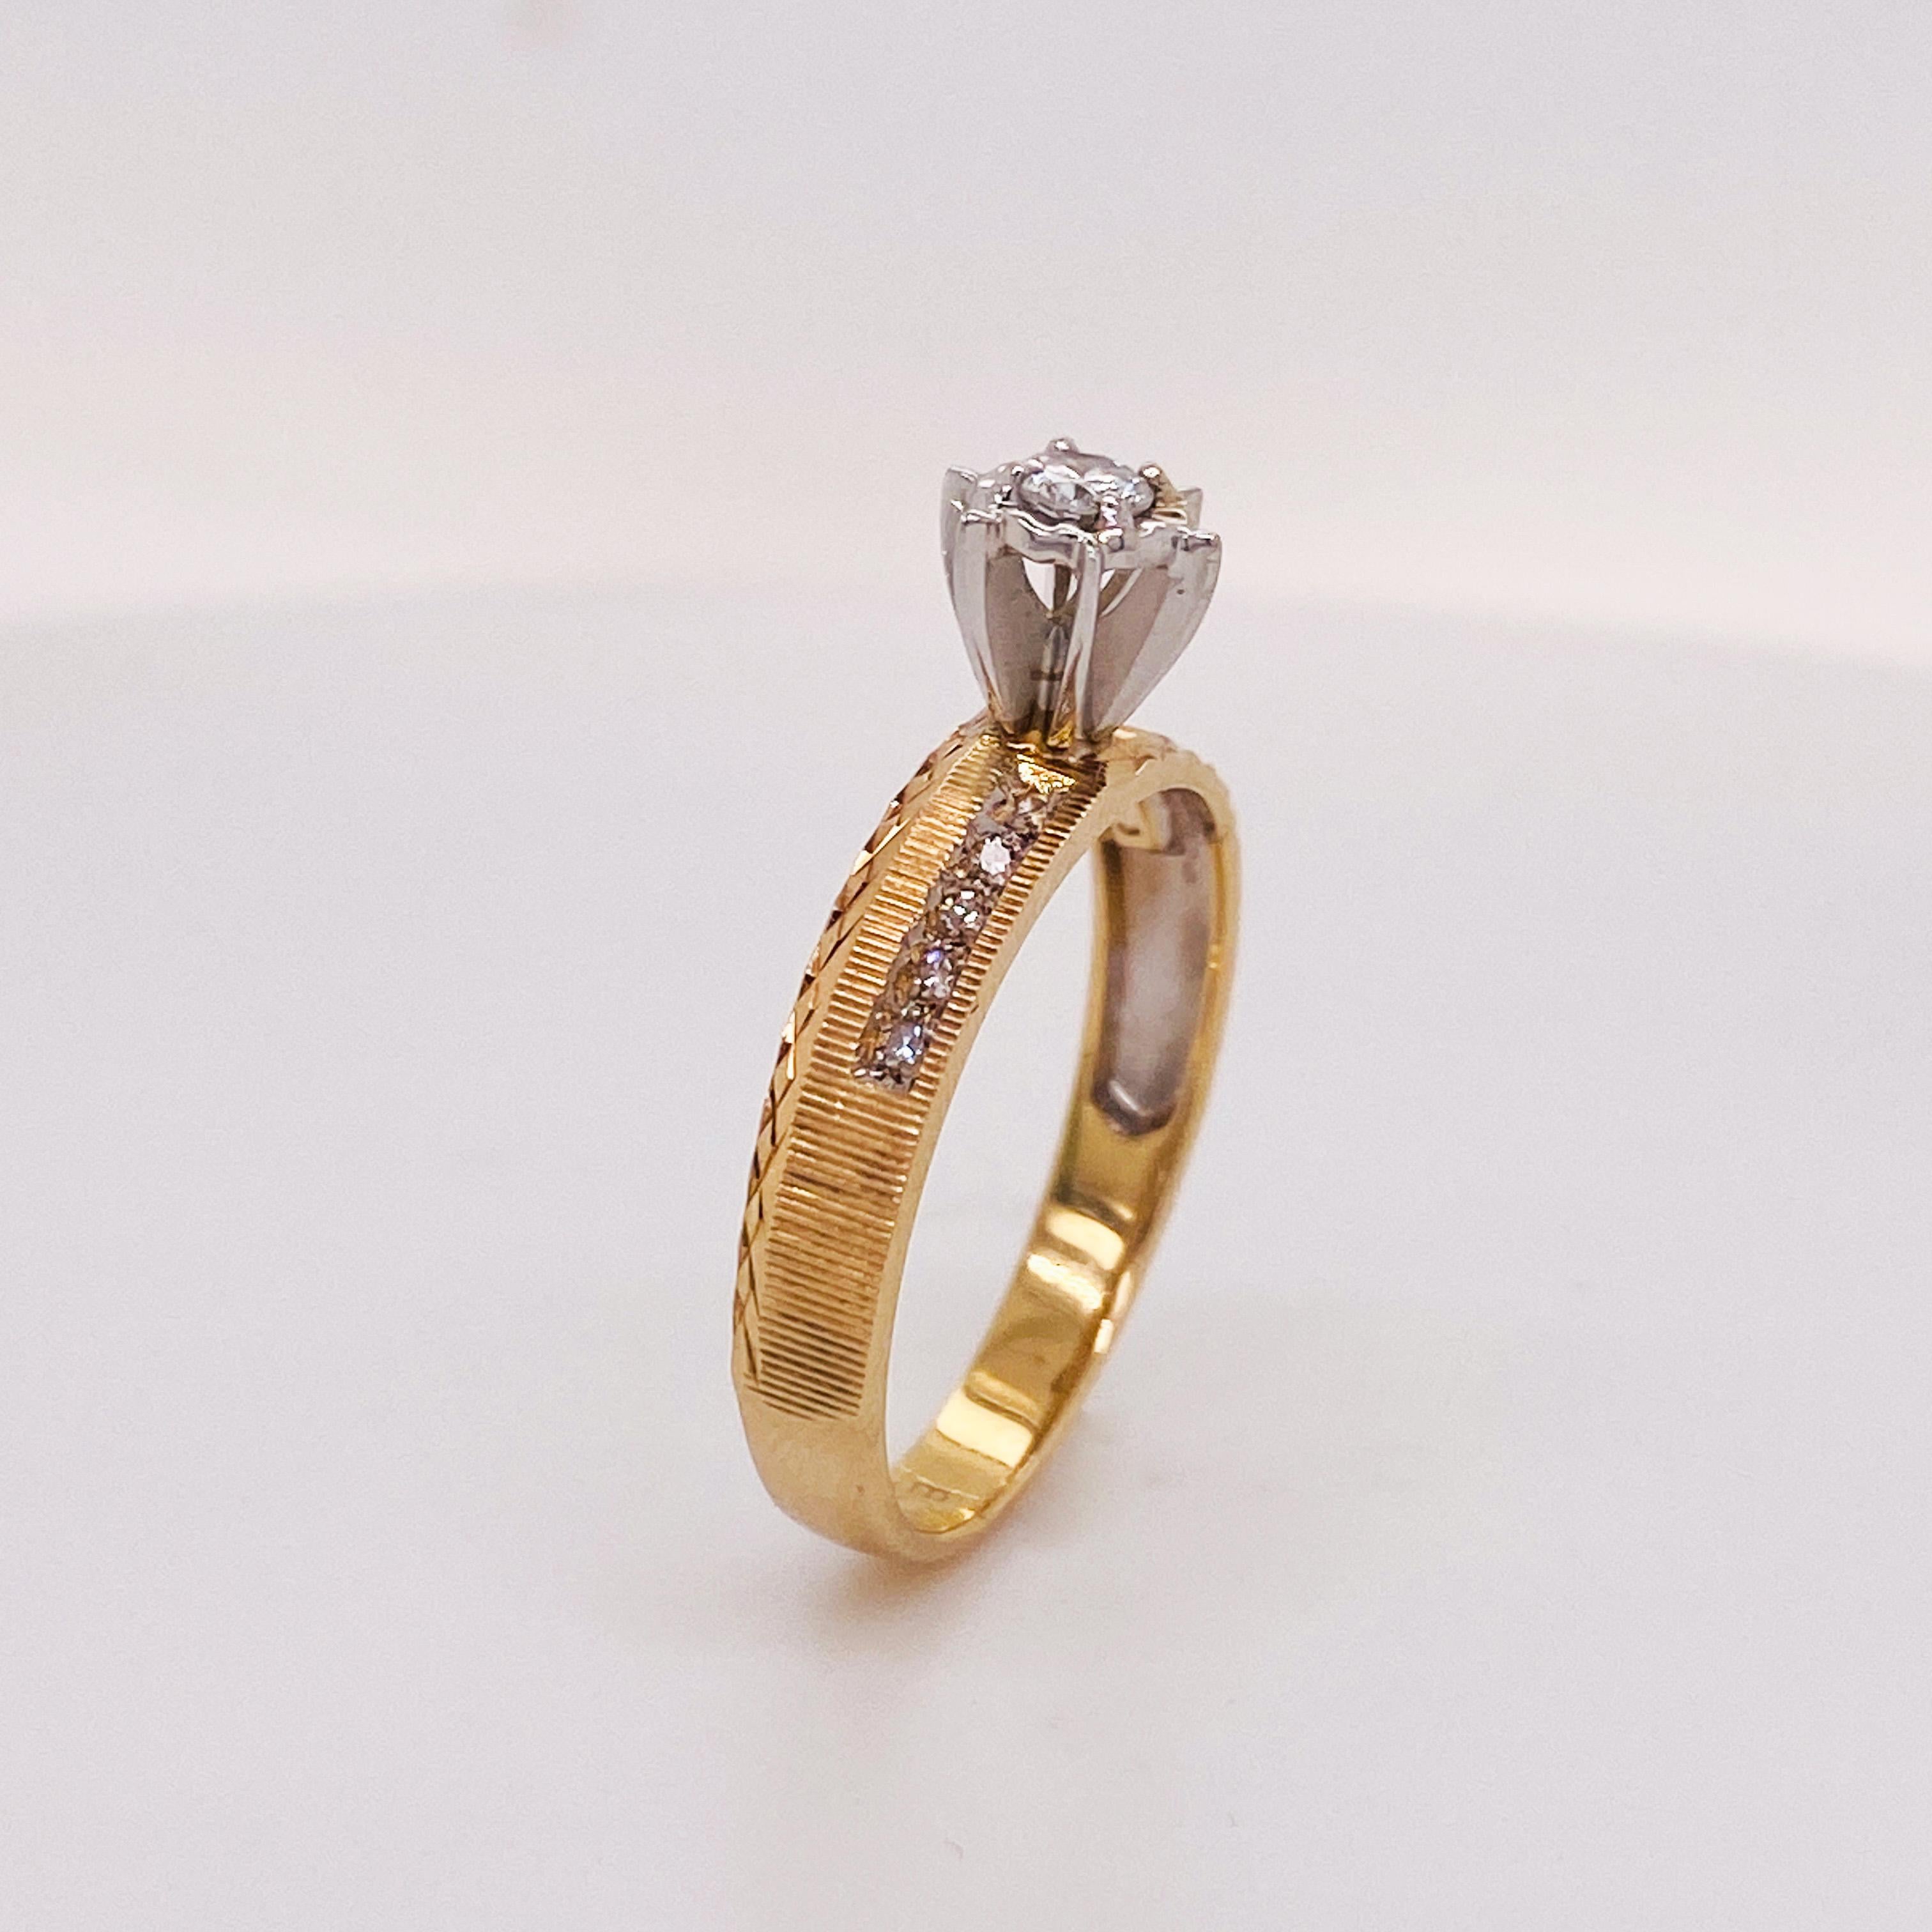 Retro Estate Diamond Engagement Ring in 14K Gold with Lines and Diamond Cut Patterns For Sale